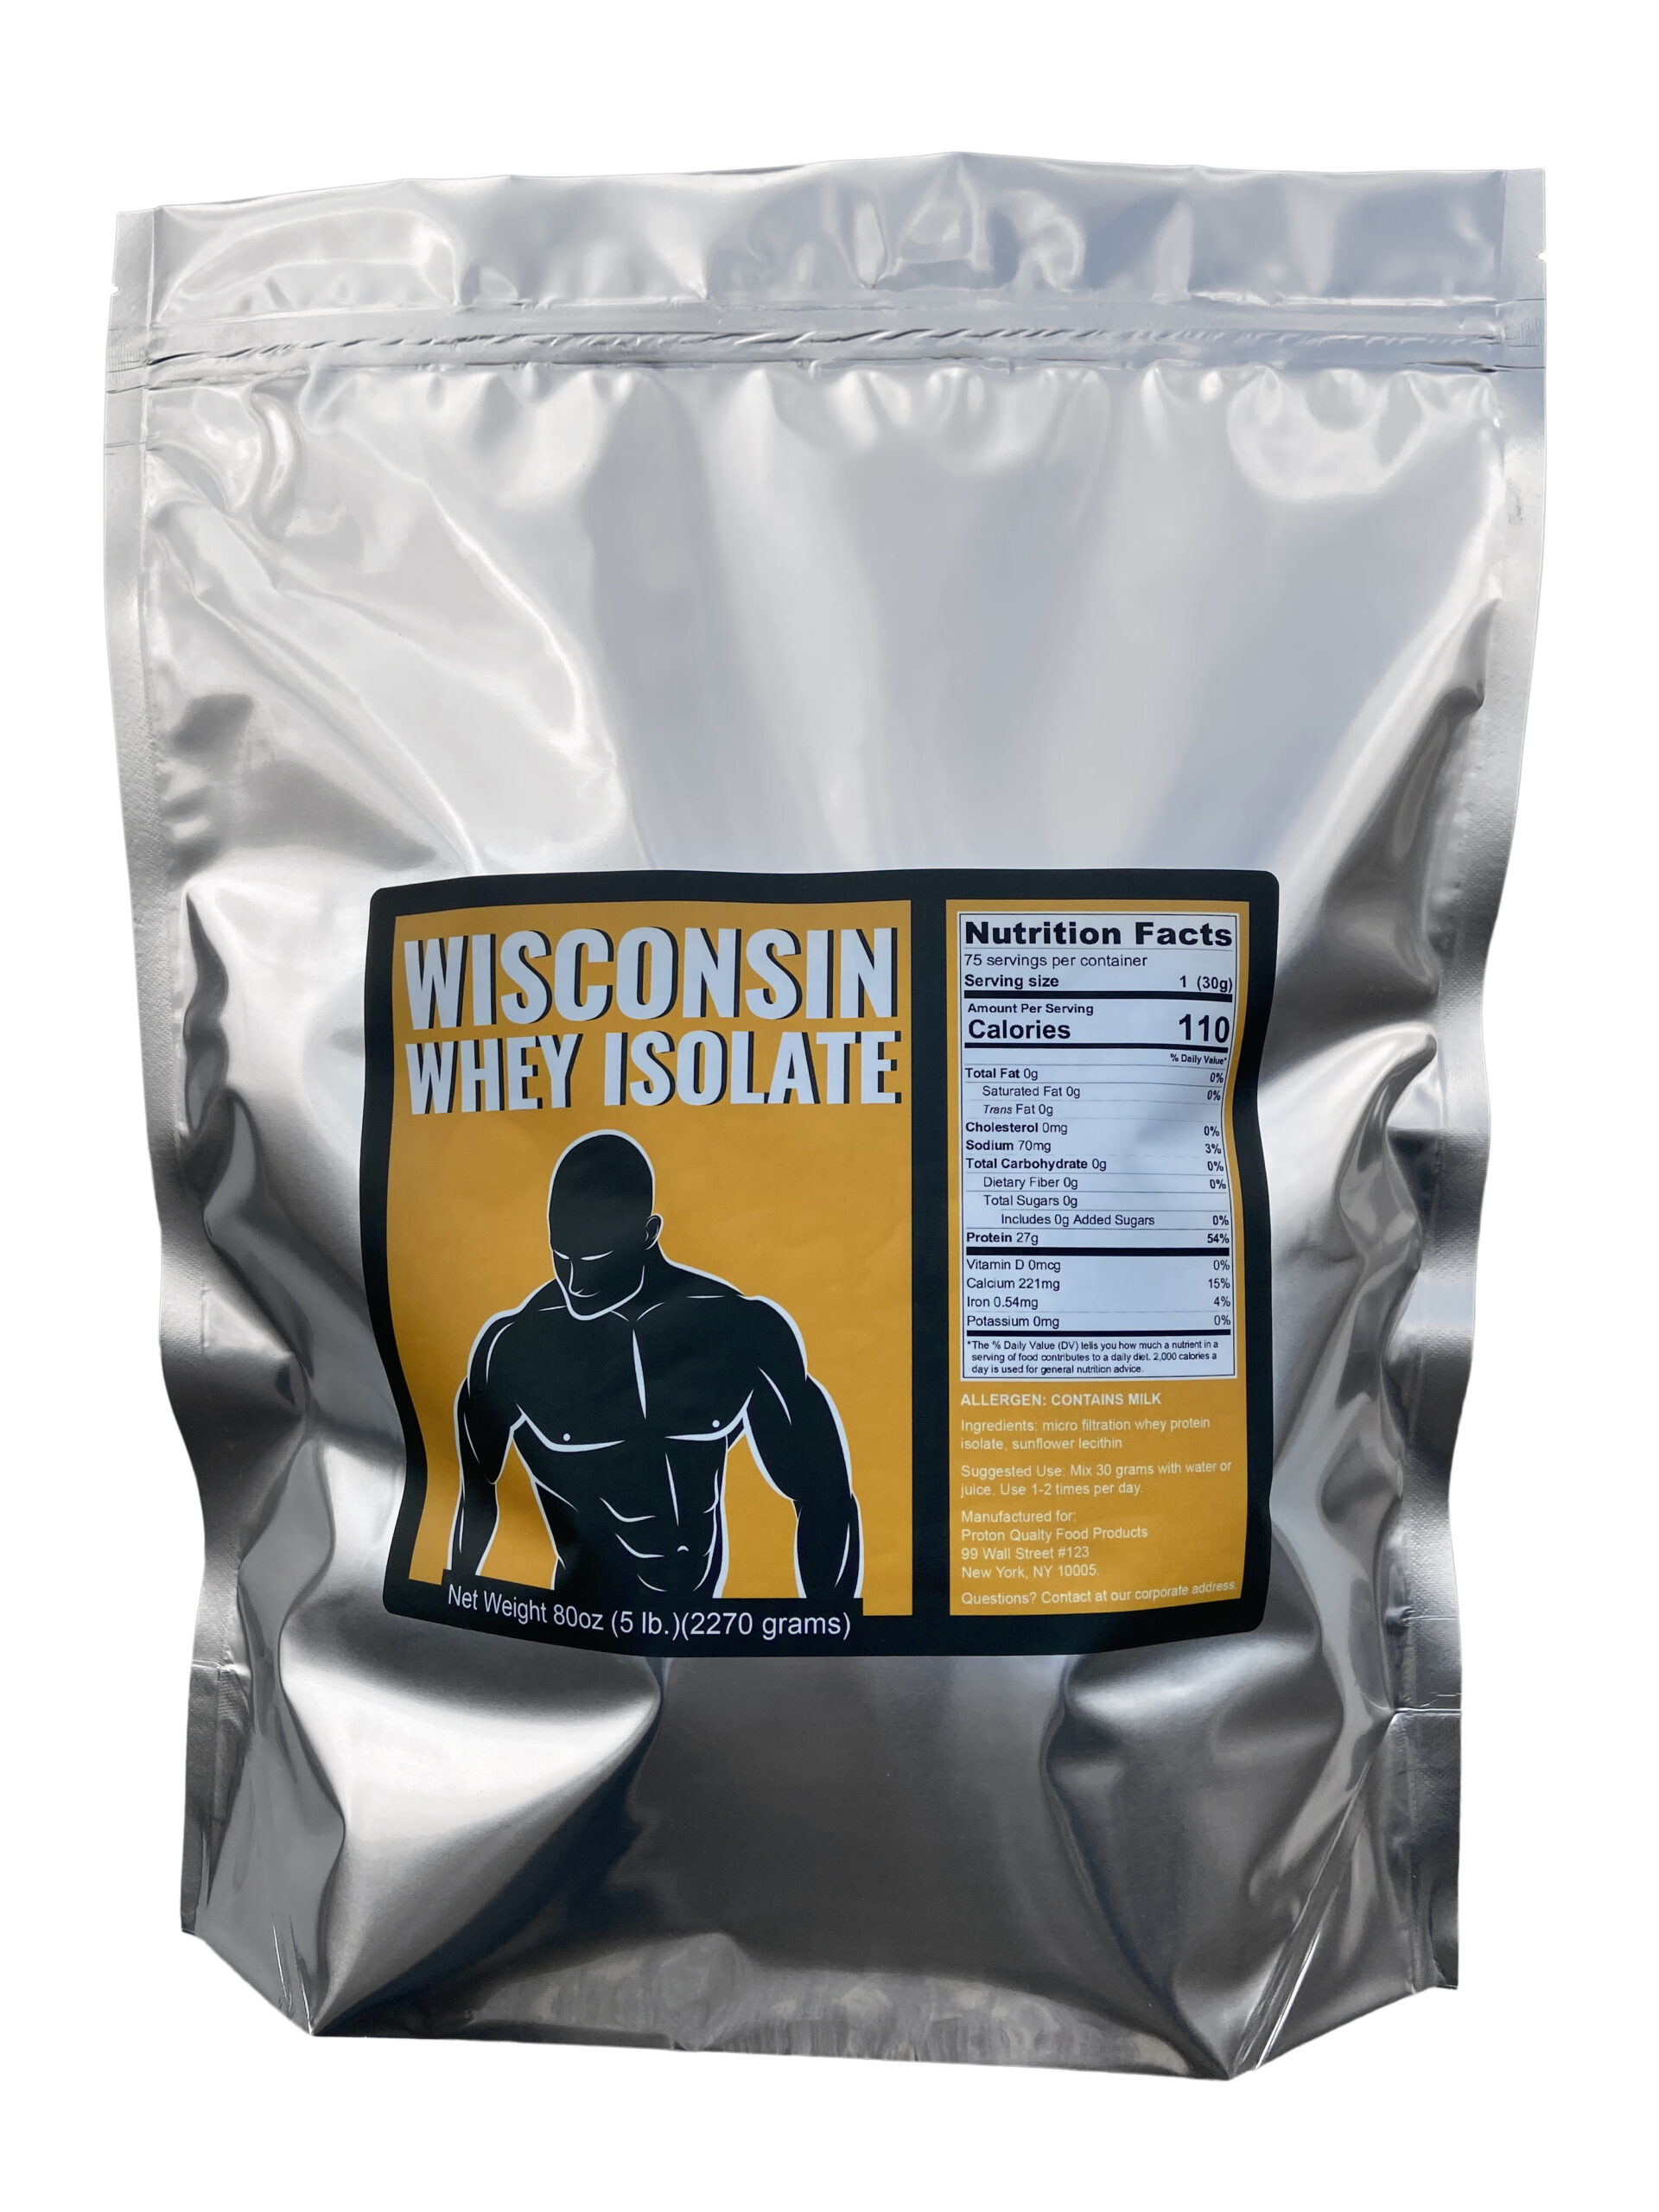 Wisconsin Whey Isolate 5 lbs Subscription Every 2 months